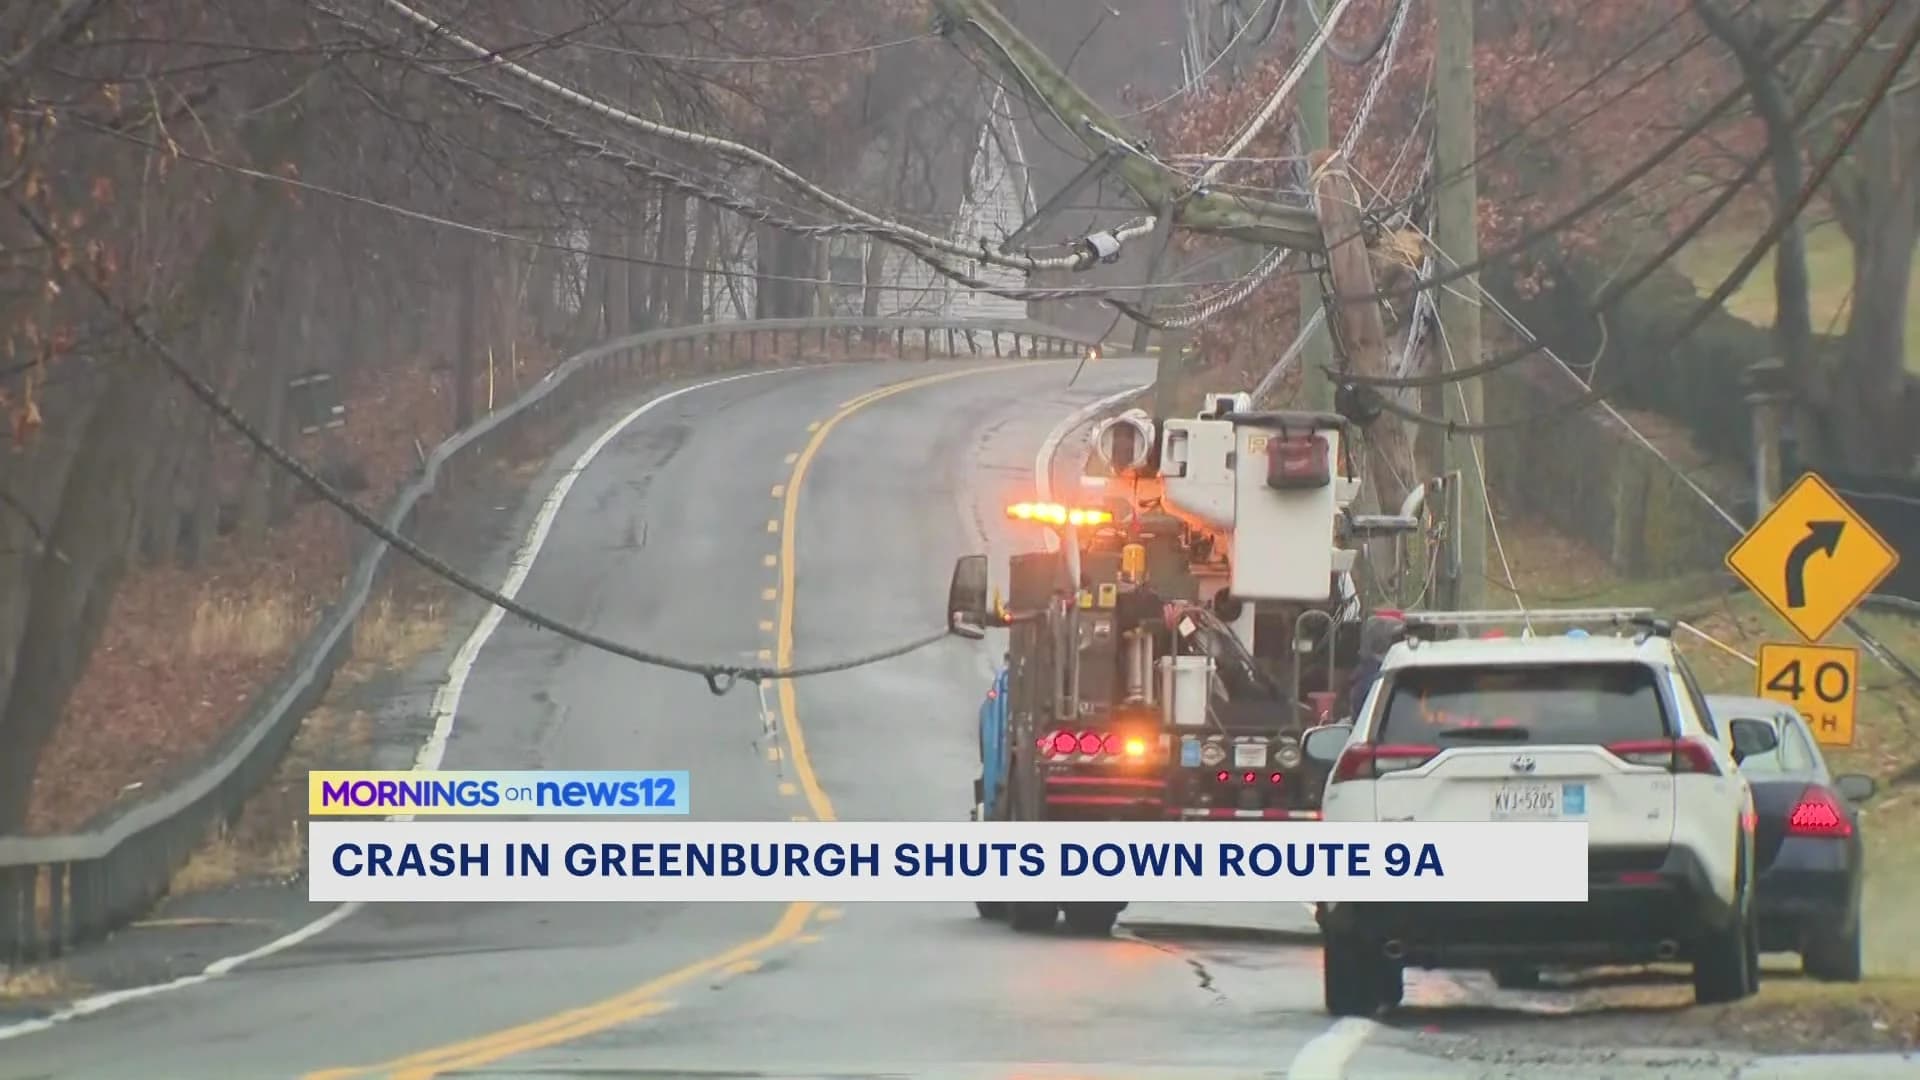 Car smashes into utility poles, shuts down Route 9A in Greenburgh for hours